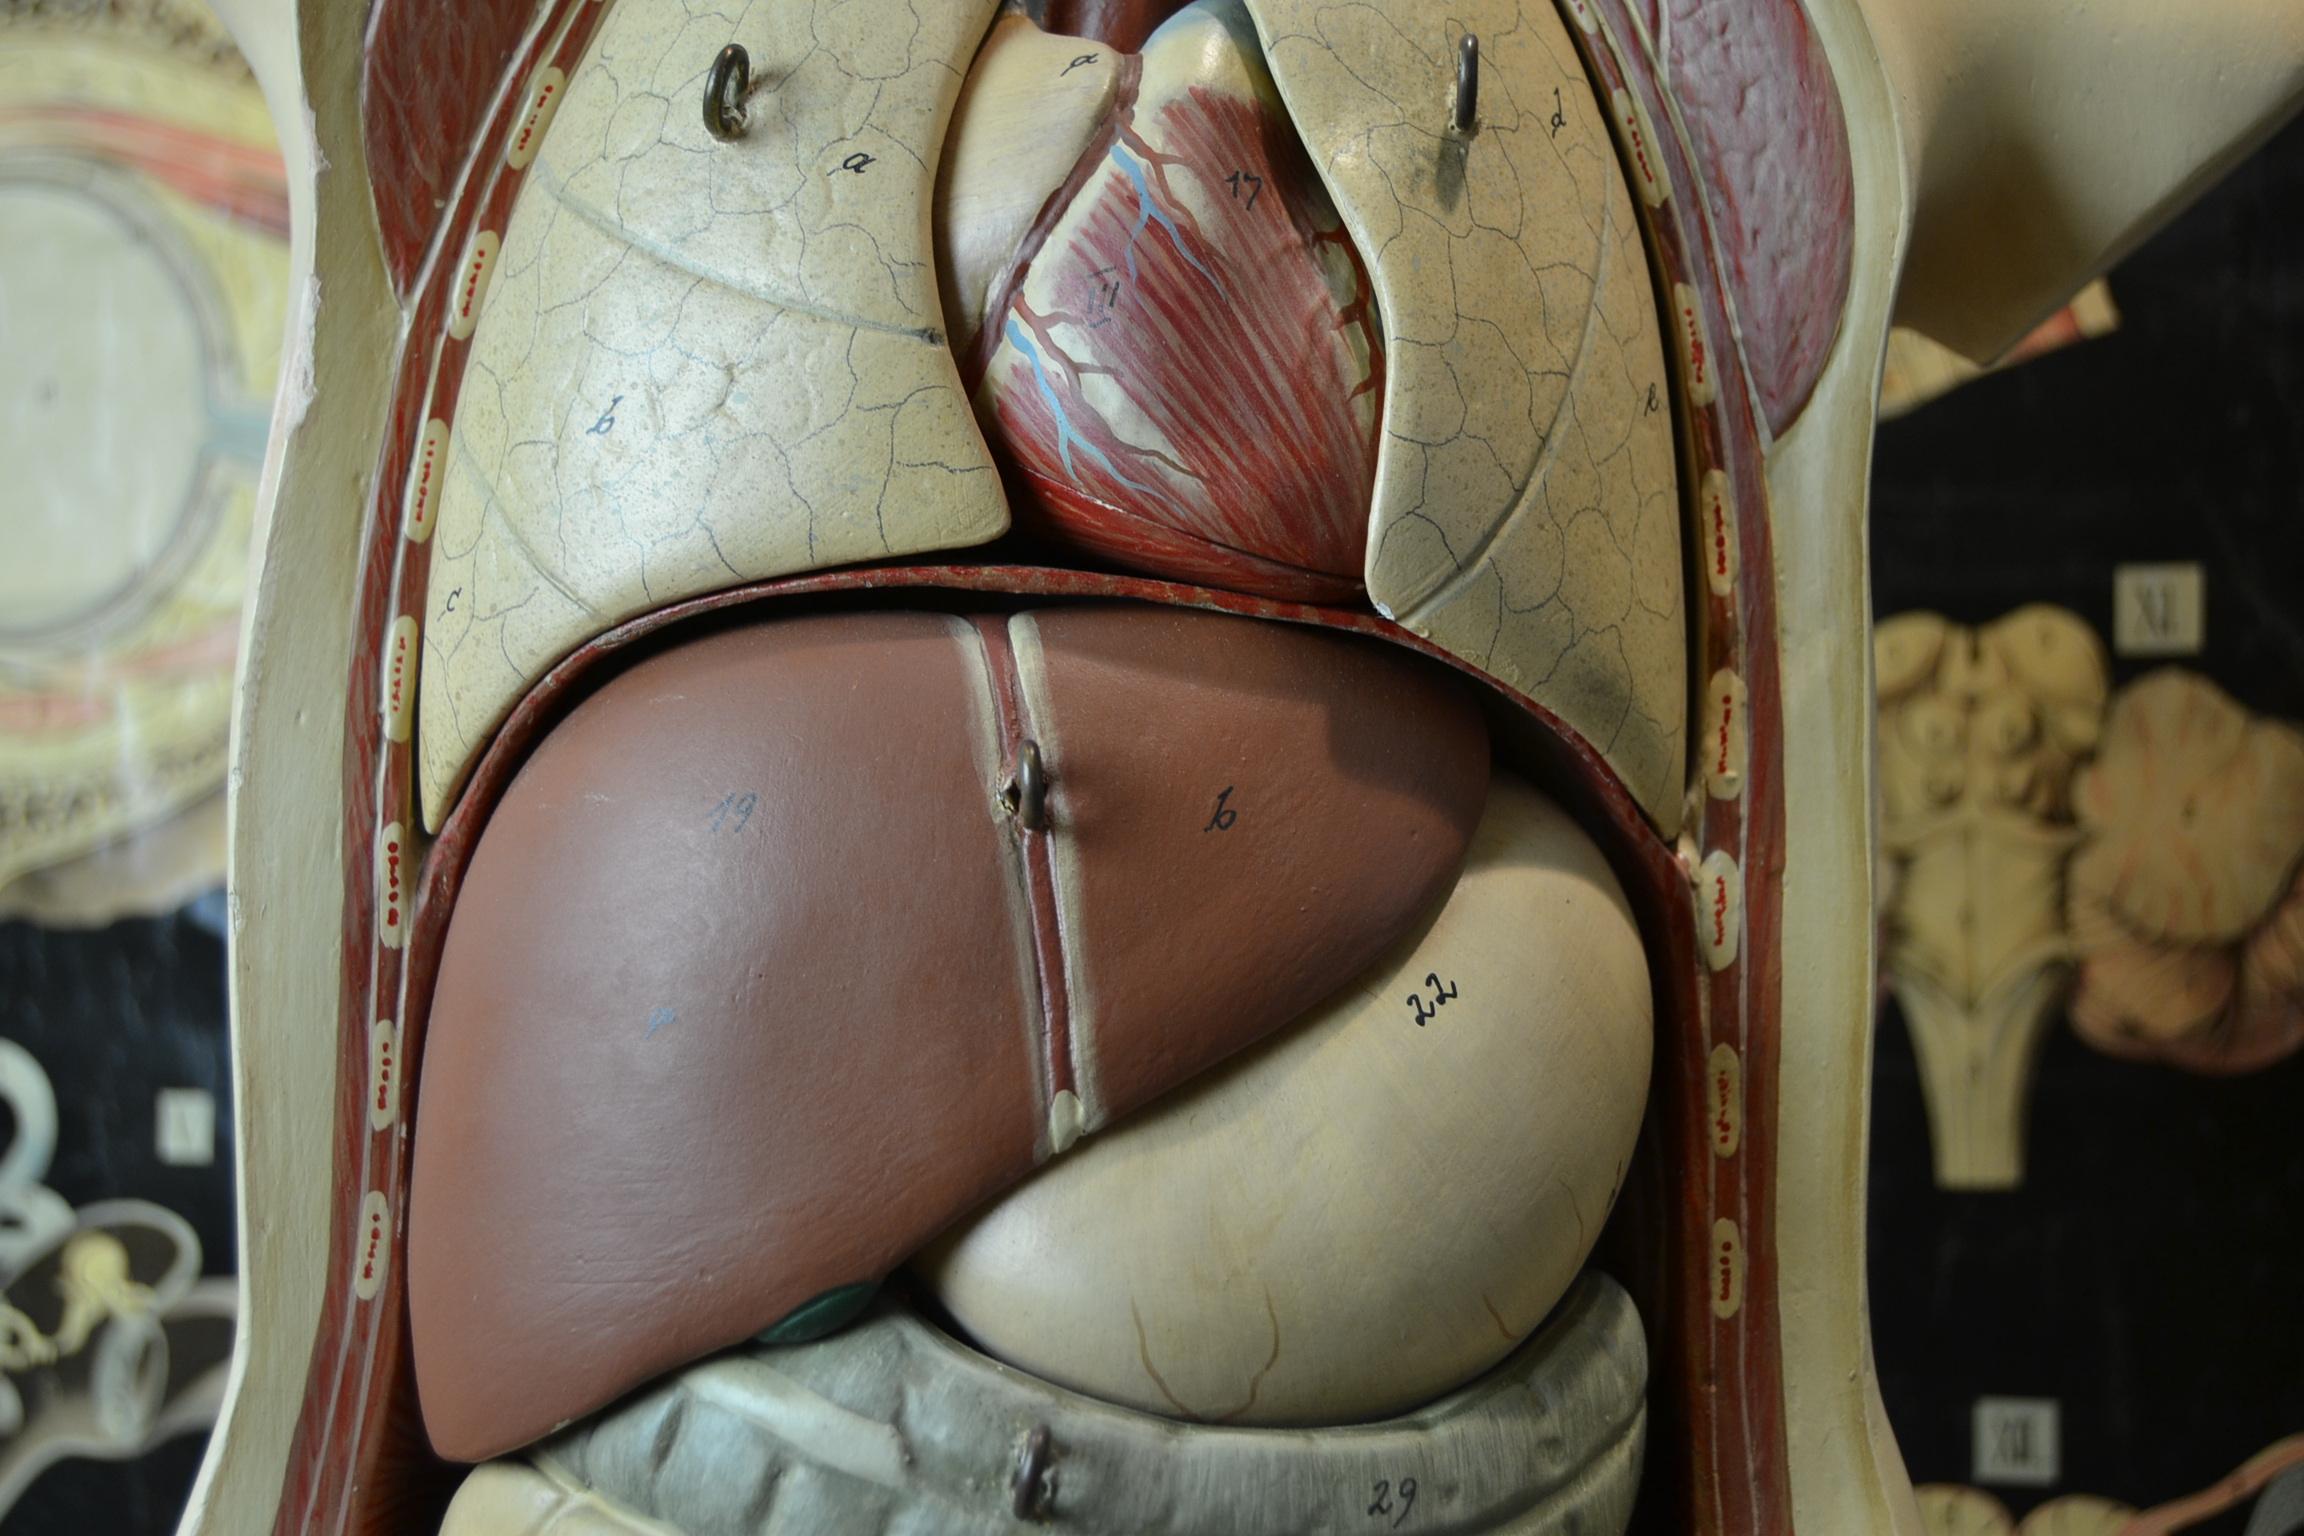 anatomy doll with removable organs